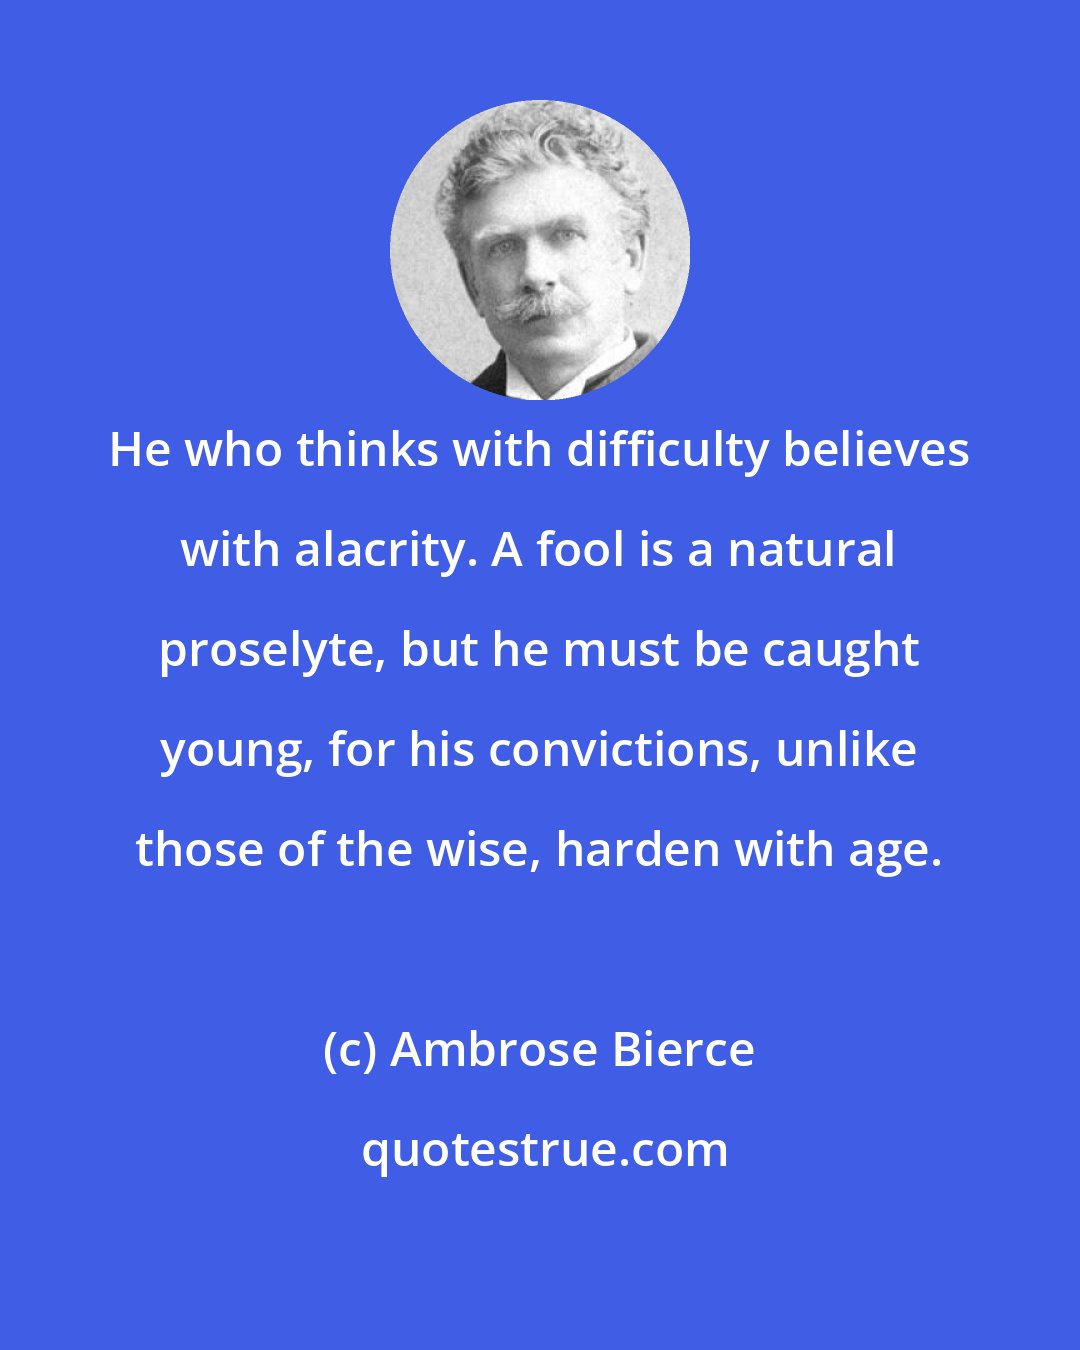 Ambrose Bierce: He who thinks with difficulty believes with alacrity. A fool is a natural proselyte, but he must be caught young, for his convictions, unlike those of the wise, harden with age.